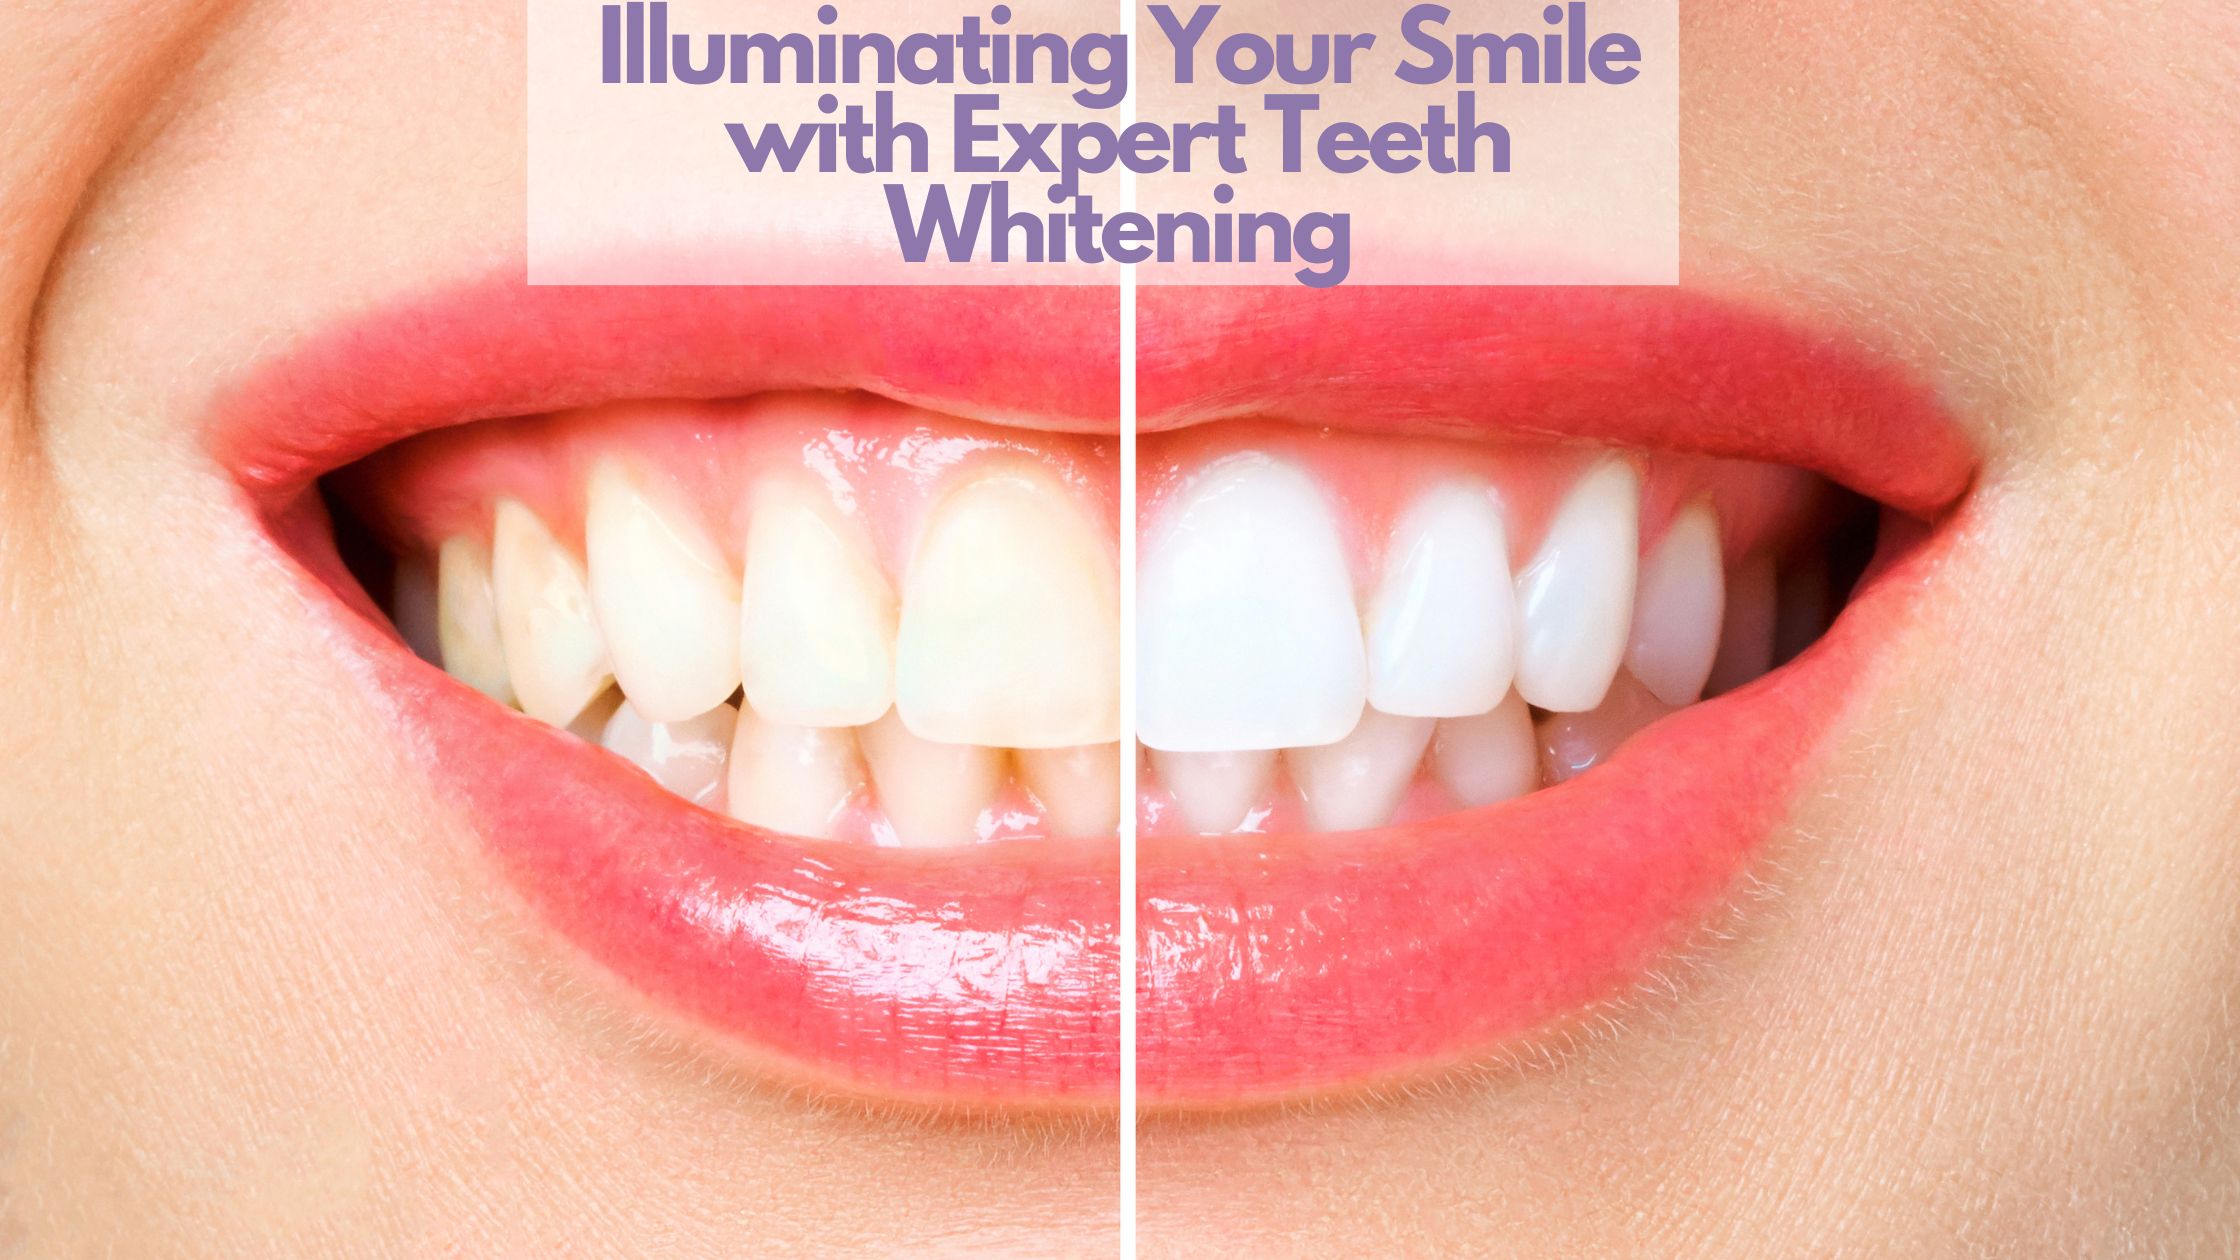 Illuminating Your Smile with Expert Teeth Whitening